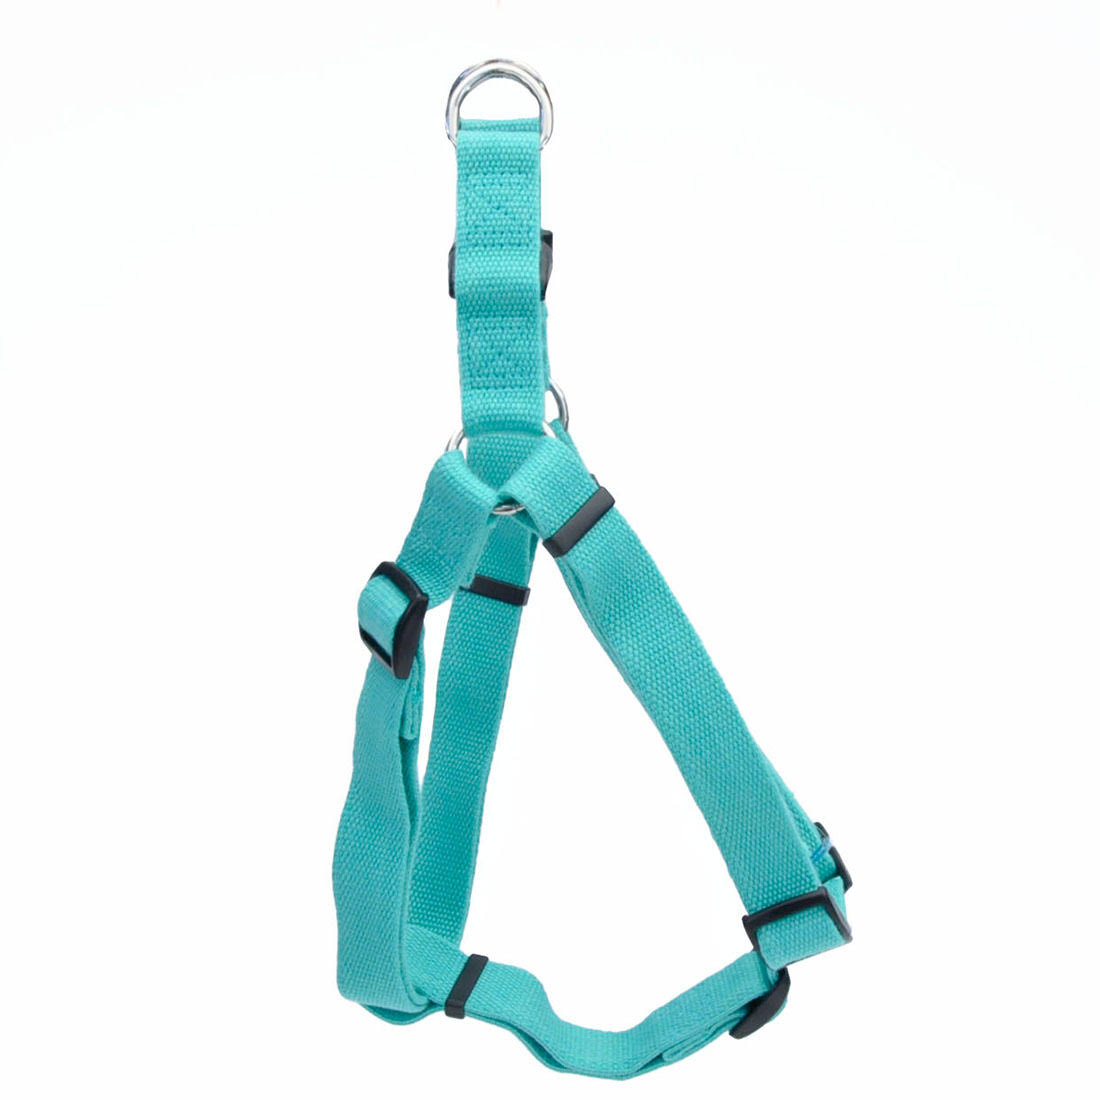 New Earth Soy Comfort Wrap Adjustable Dog Harness, Mint, 3/8-in X 12-18-in